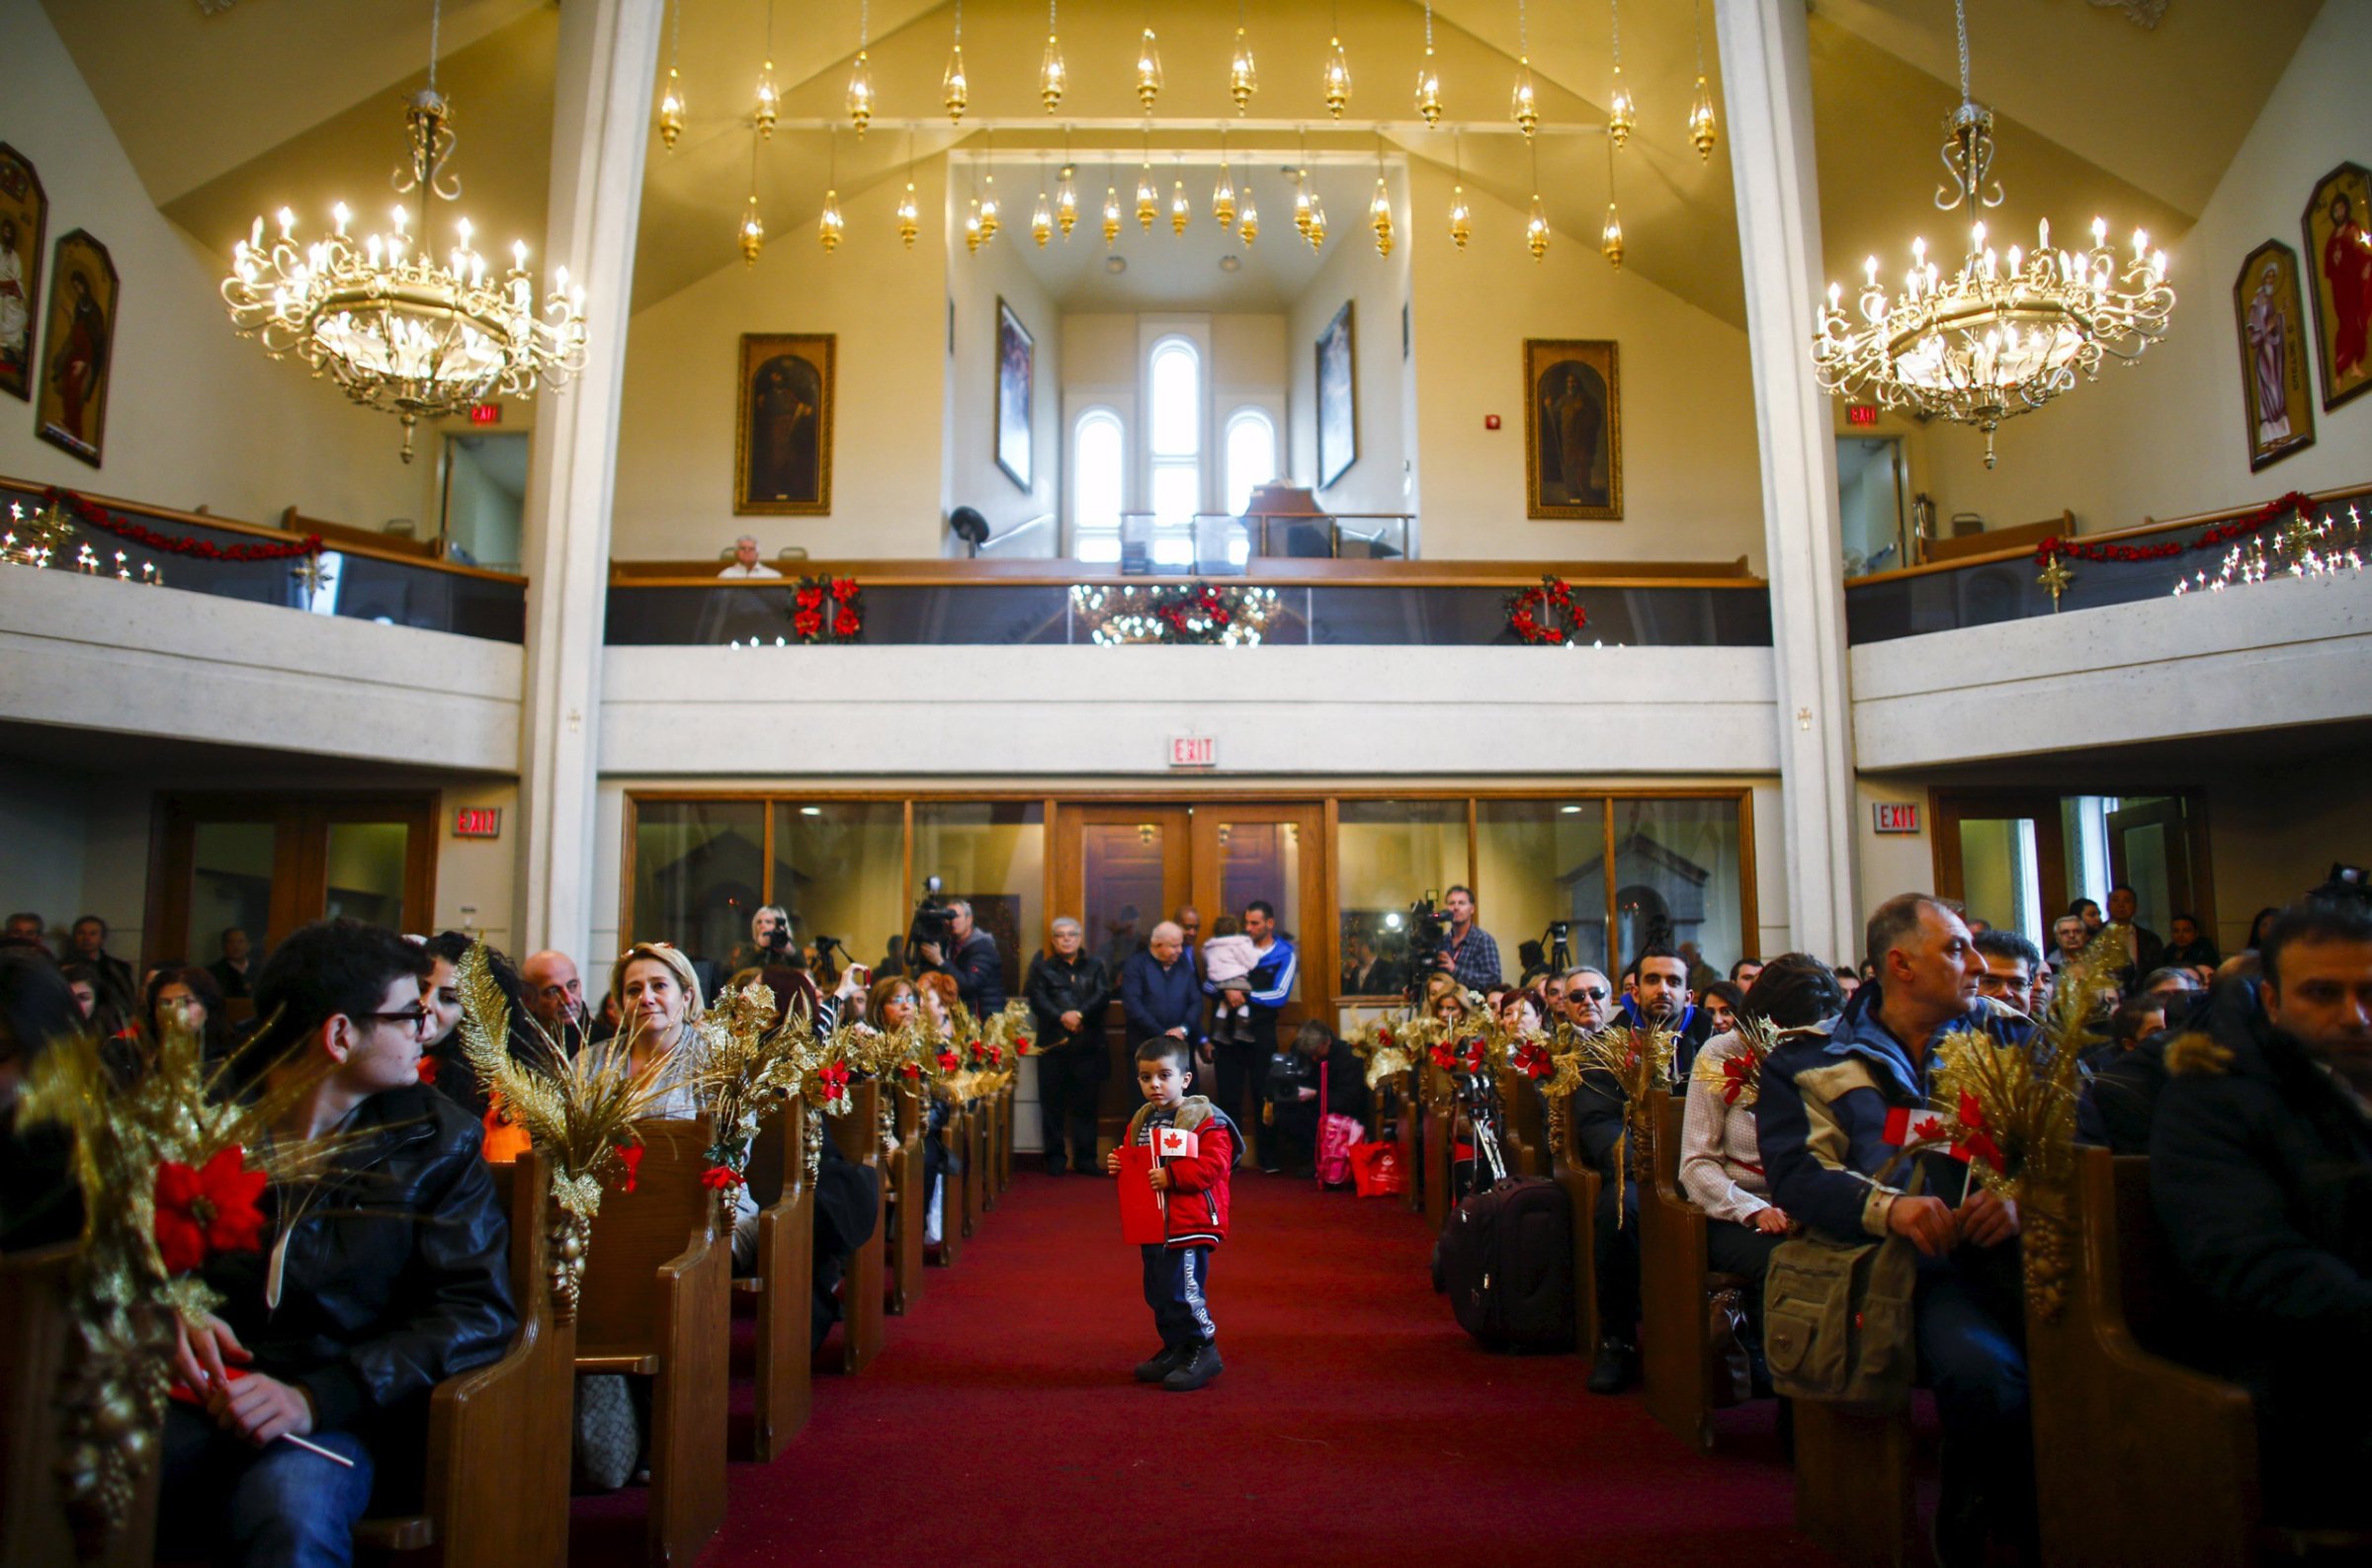 REFILE - CORRECTING CITY Syrian refugee Levon Kourken, 4, stands on an aisle during a welcoming service for Syrian refugees at St. Mary Armenian Apostolic Church at the Armenian Community Centre of Toronto in Toronto, December 11, 2015. REUTERS/Mark Blinch